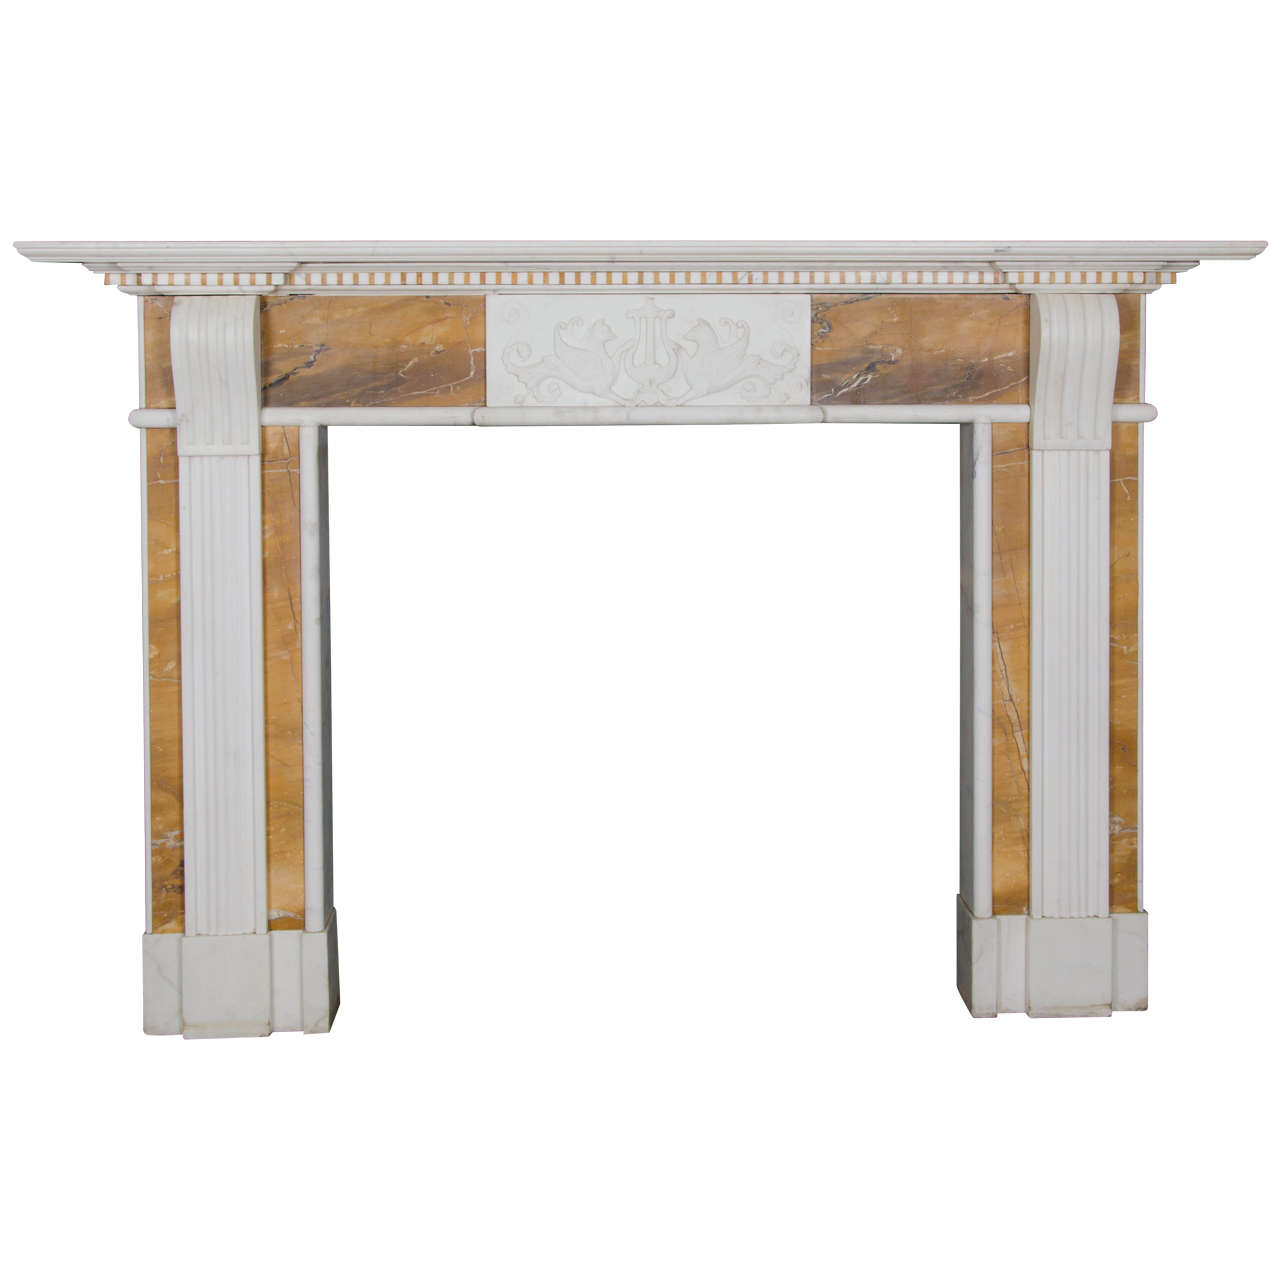 Georgian Style Statuary and Sienna Marble Fire Surround For Sale